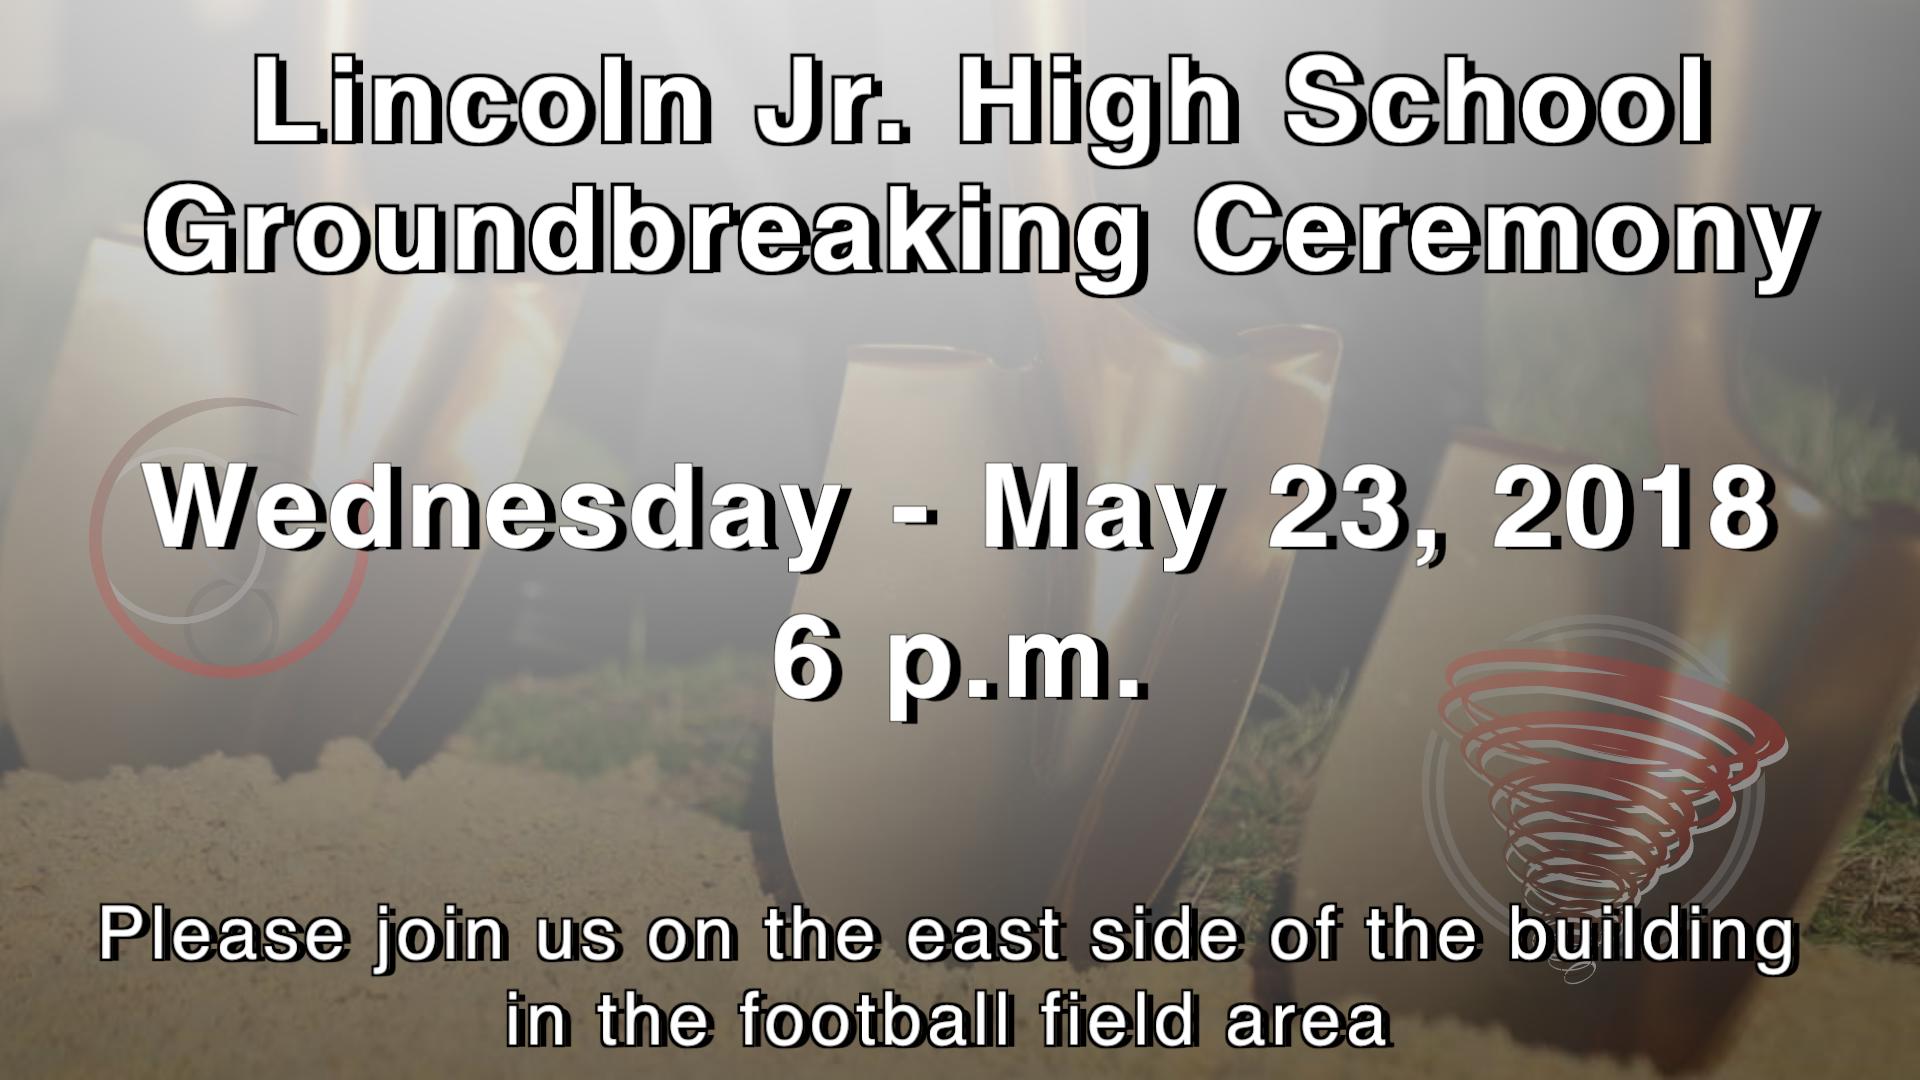 Lincoln Jr. High School Groundbreaking Ceremony Wednesday, May 23, 2018 6 p.m. Please join us on the east side of the building in the football field area